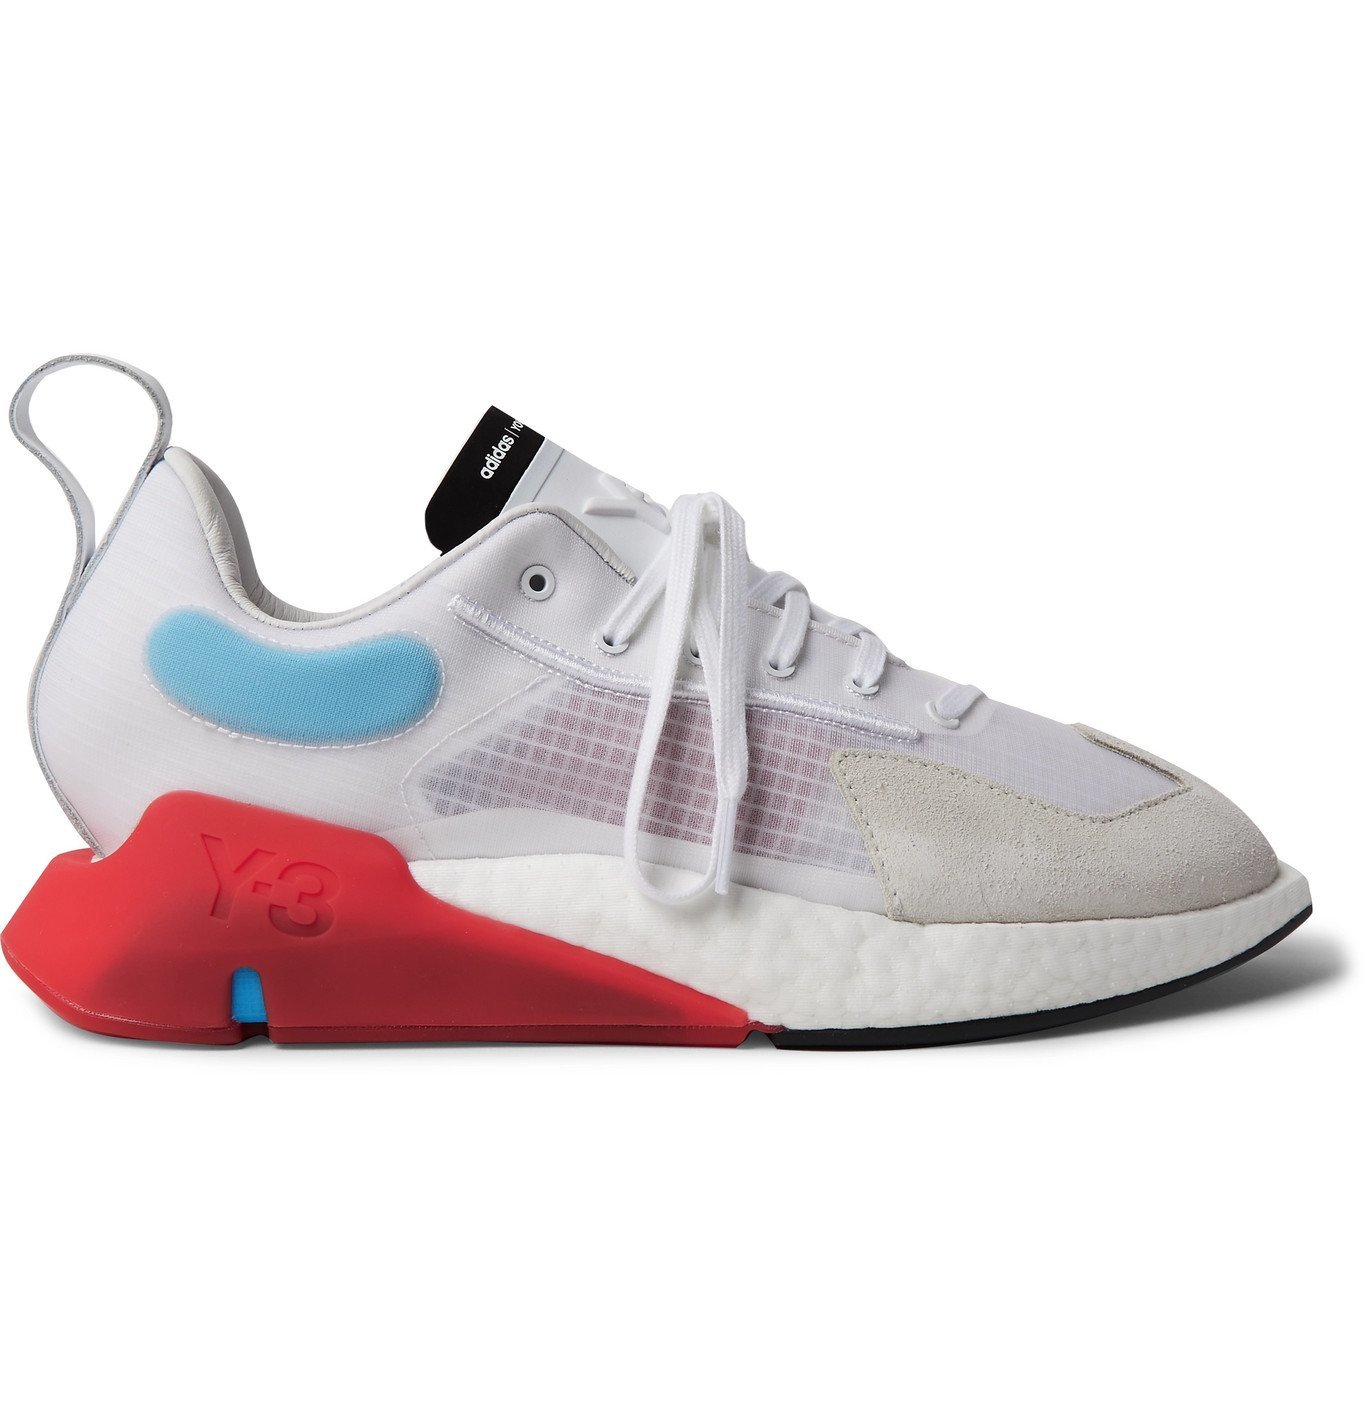 Y-3 - Orisan Suede and Leather-Trimmed Ripstop Sneakers - White Y-3